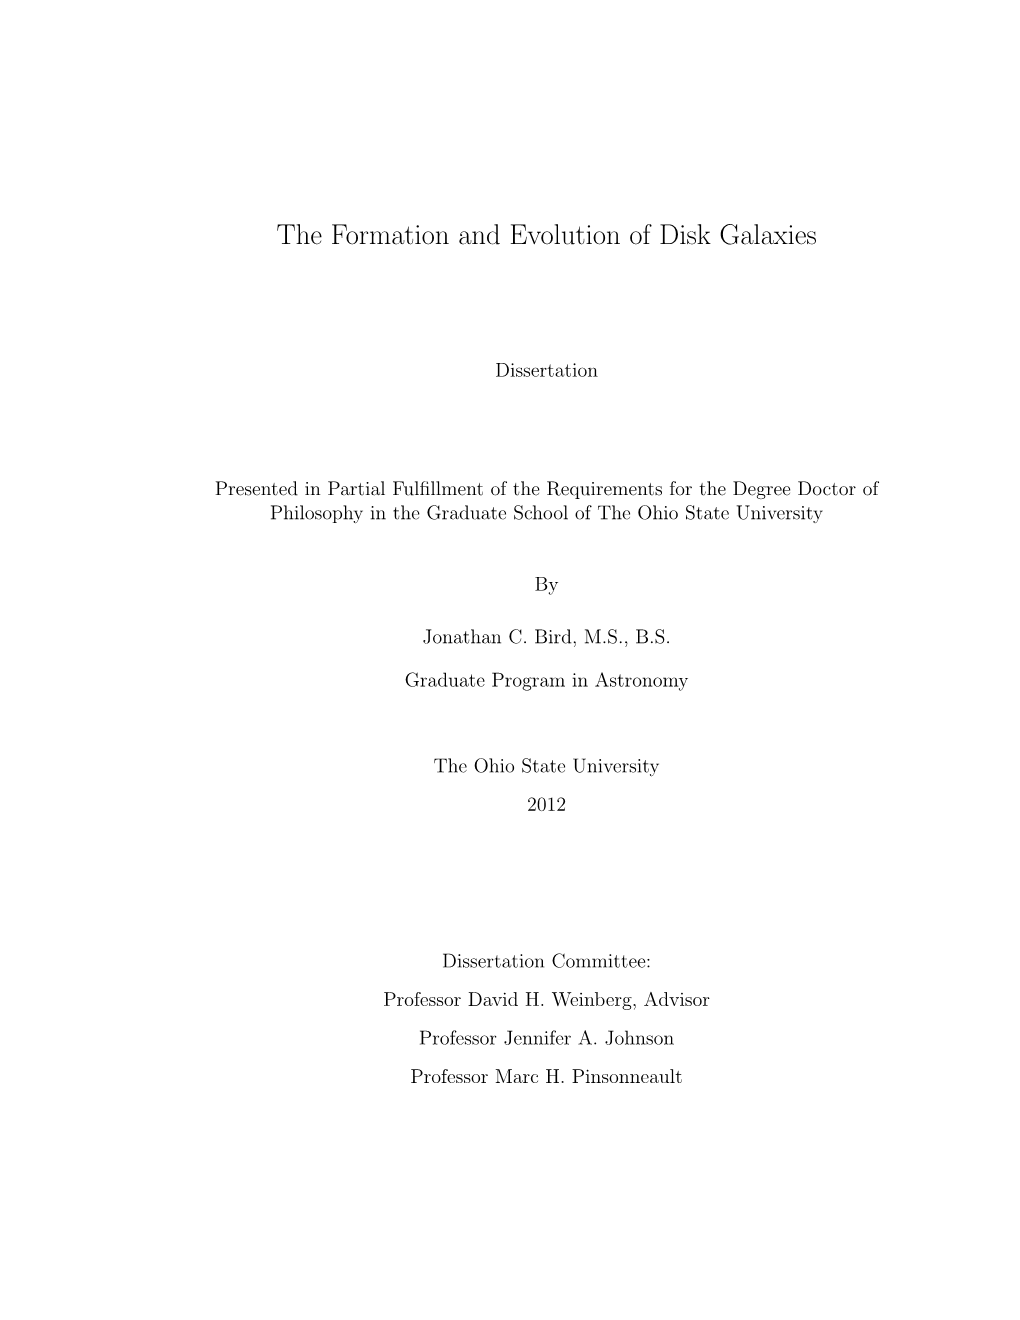 The Formation and Evolution of Disk Galaxies